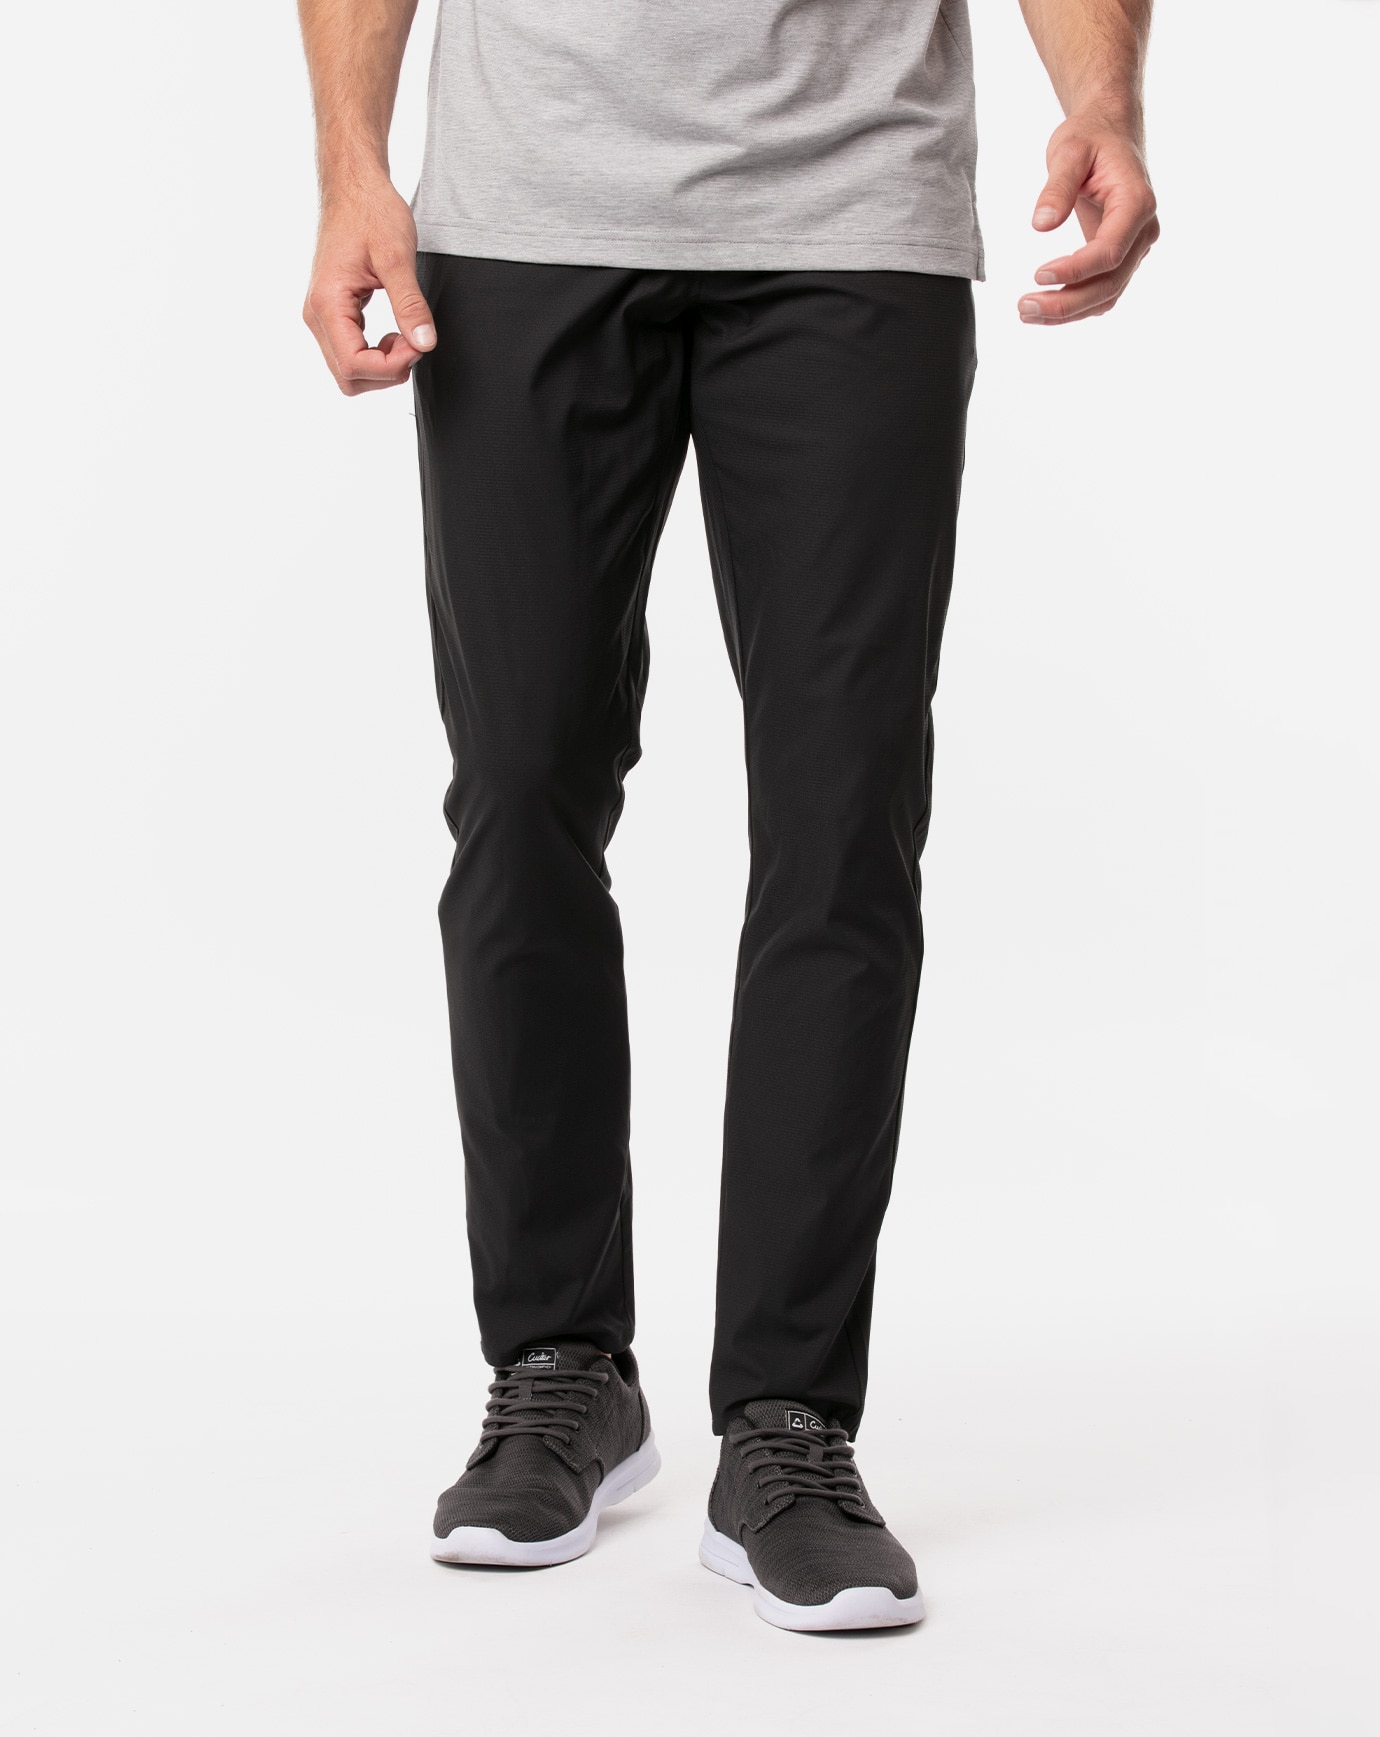 RIGHT ON TIME PANT_1MQ184_0BLK_